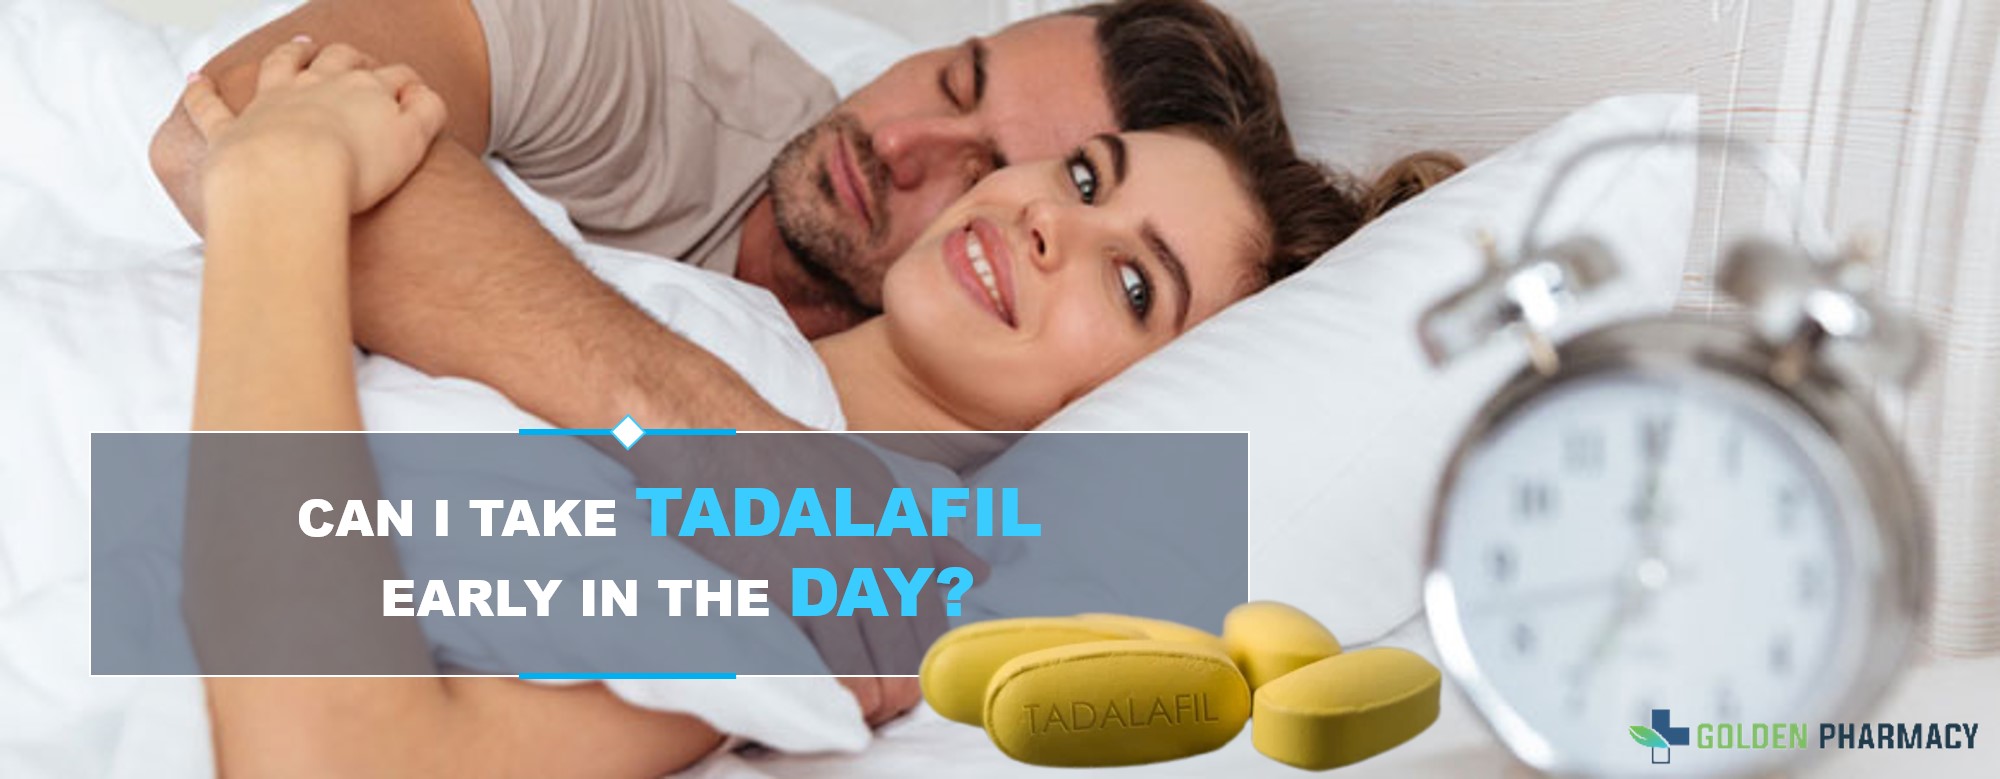 Can I take Tadalafil 10 mg early in the day?